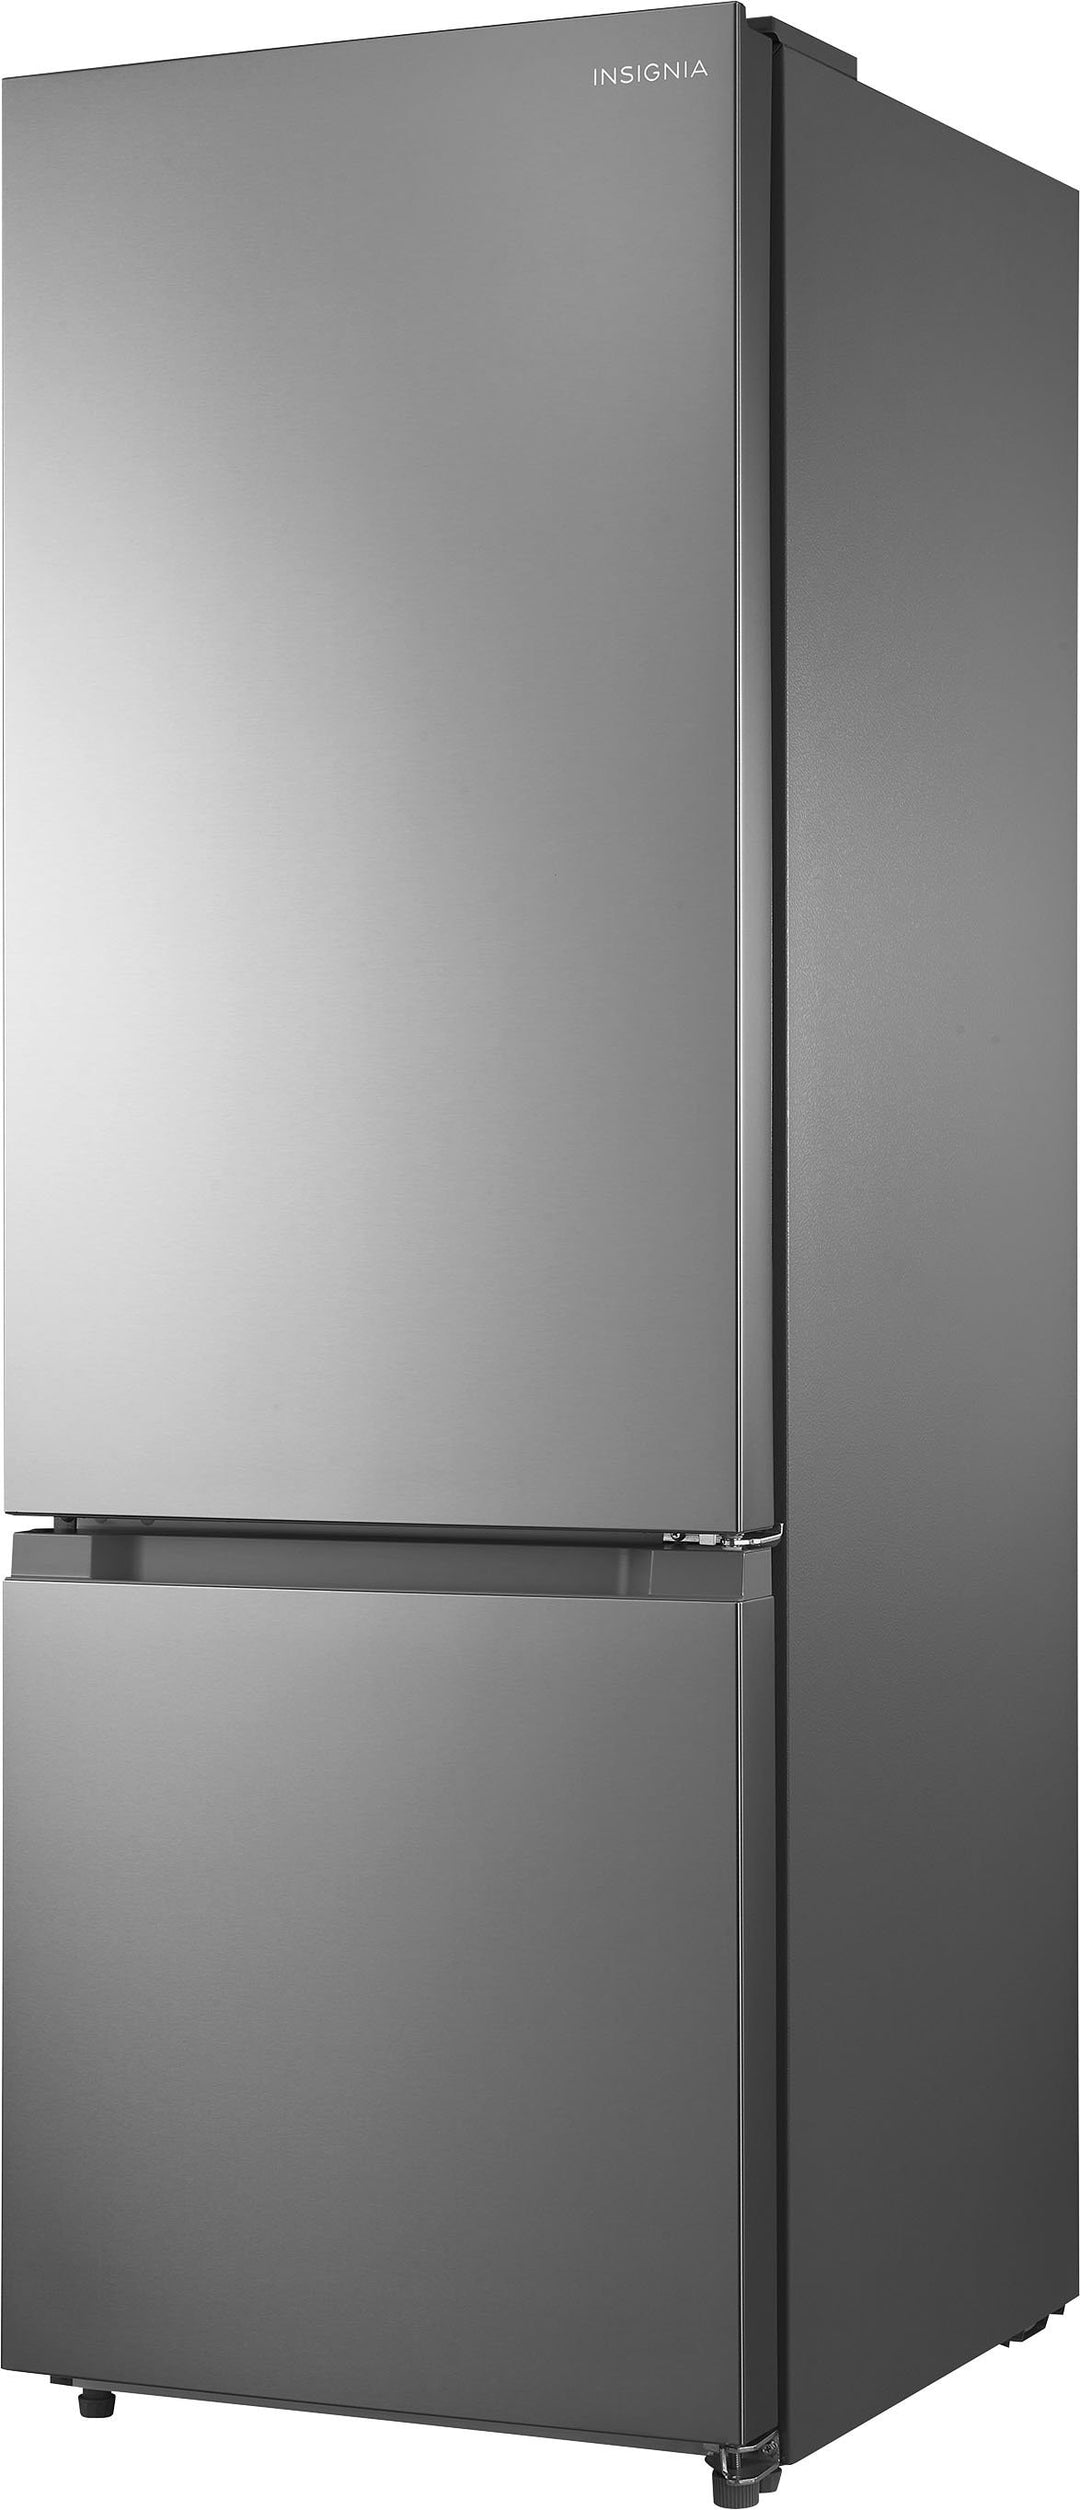 Insignia™ - 11.5 Cu. Ft. Bottom Mount Refrigerator - Stainless steel_2